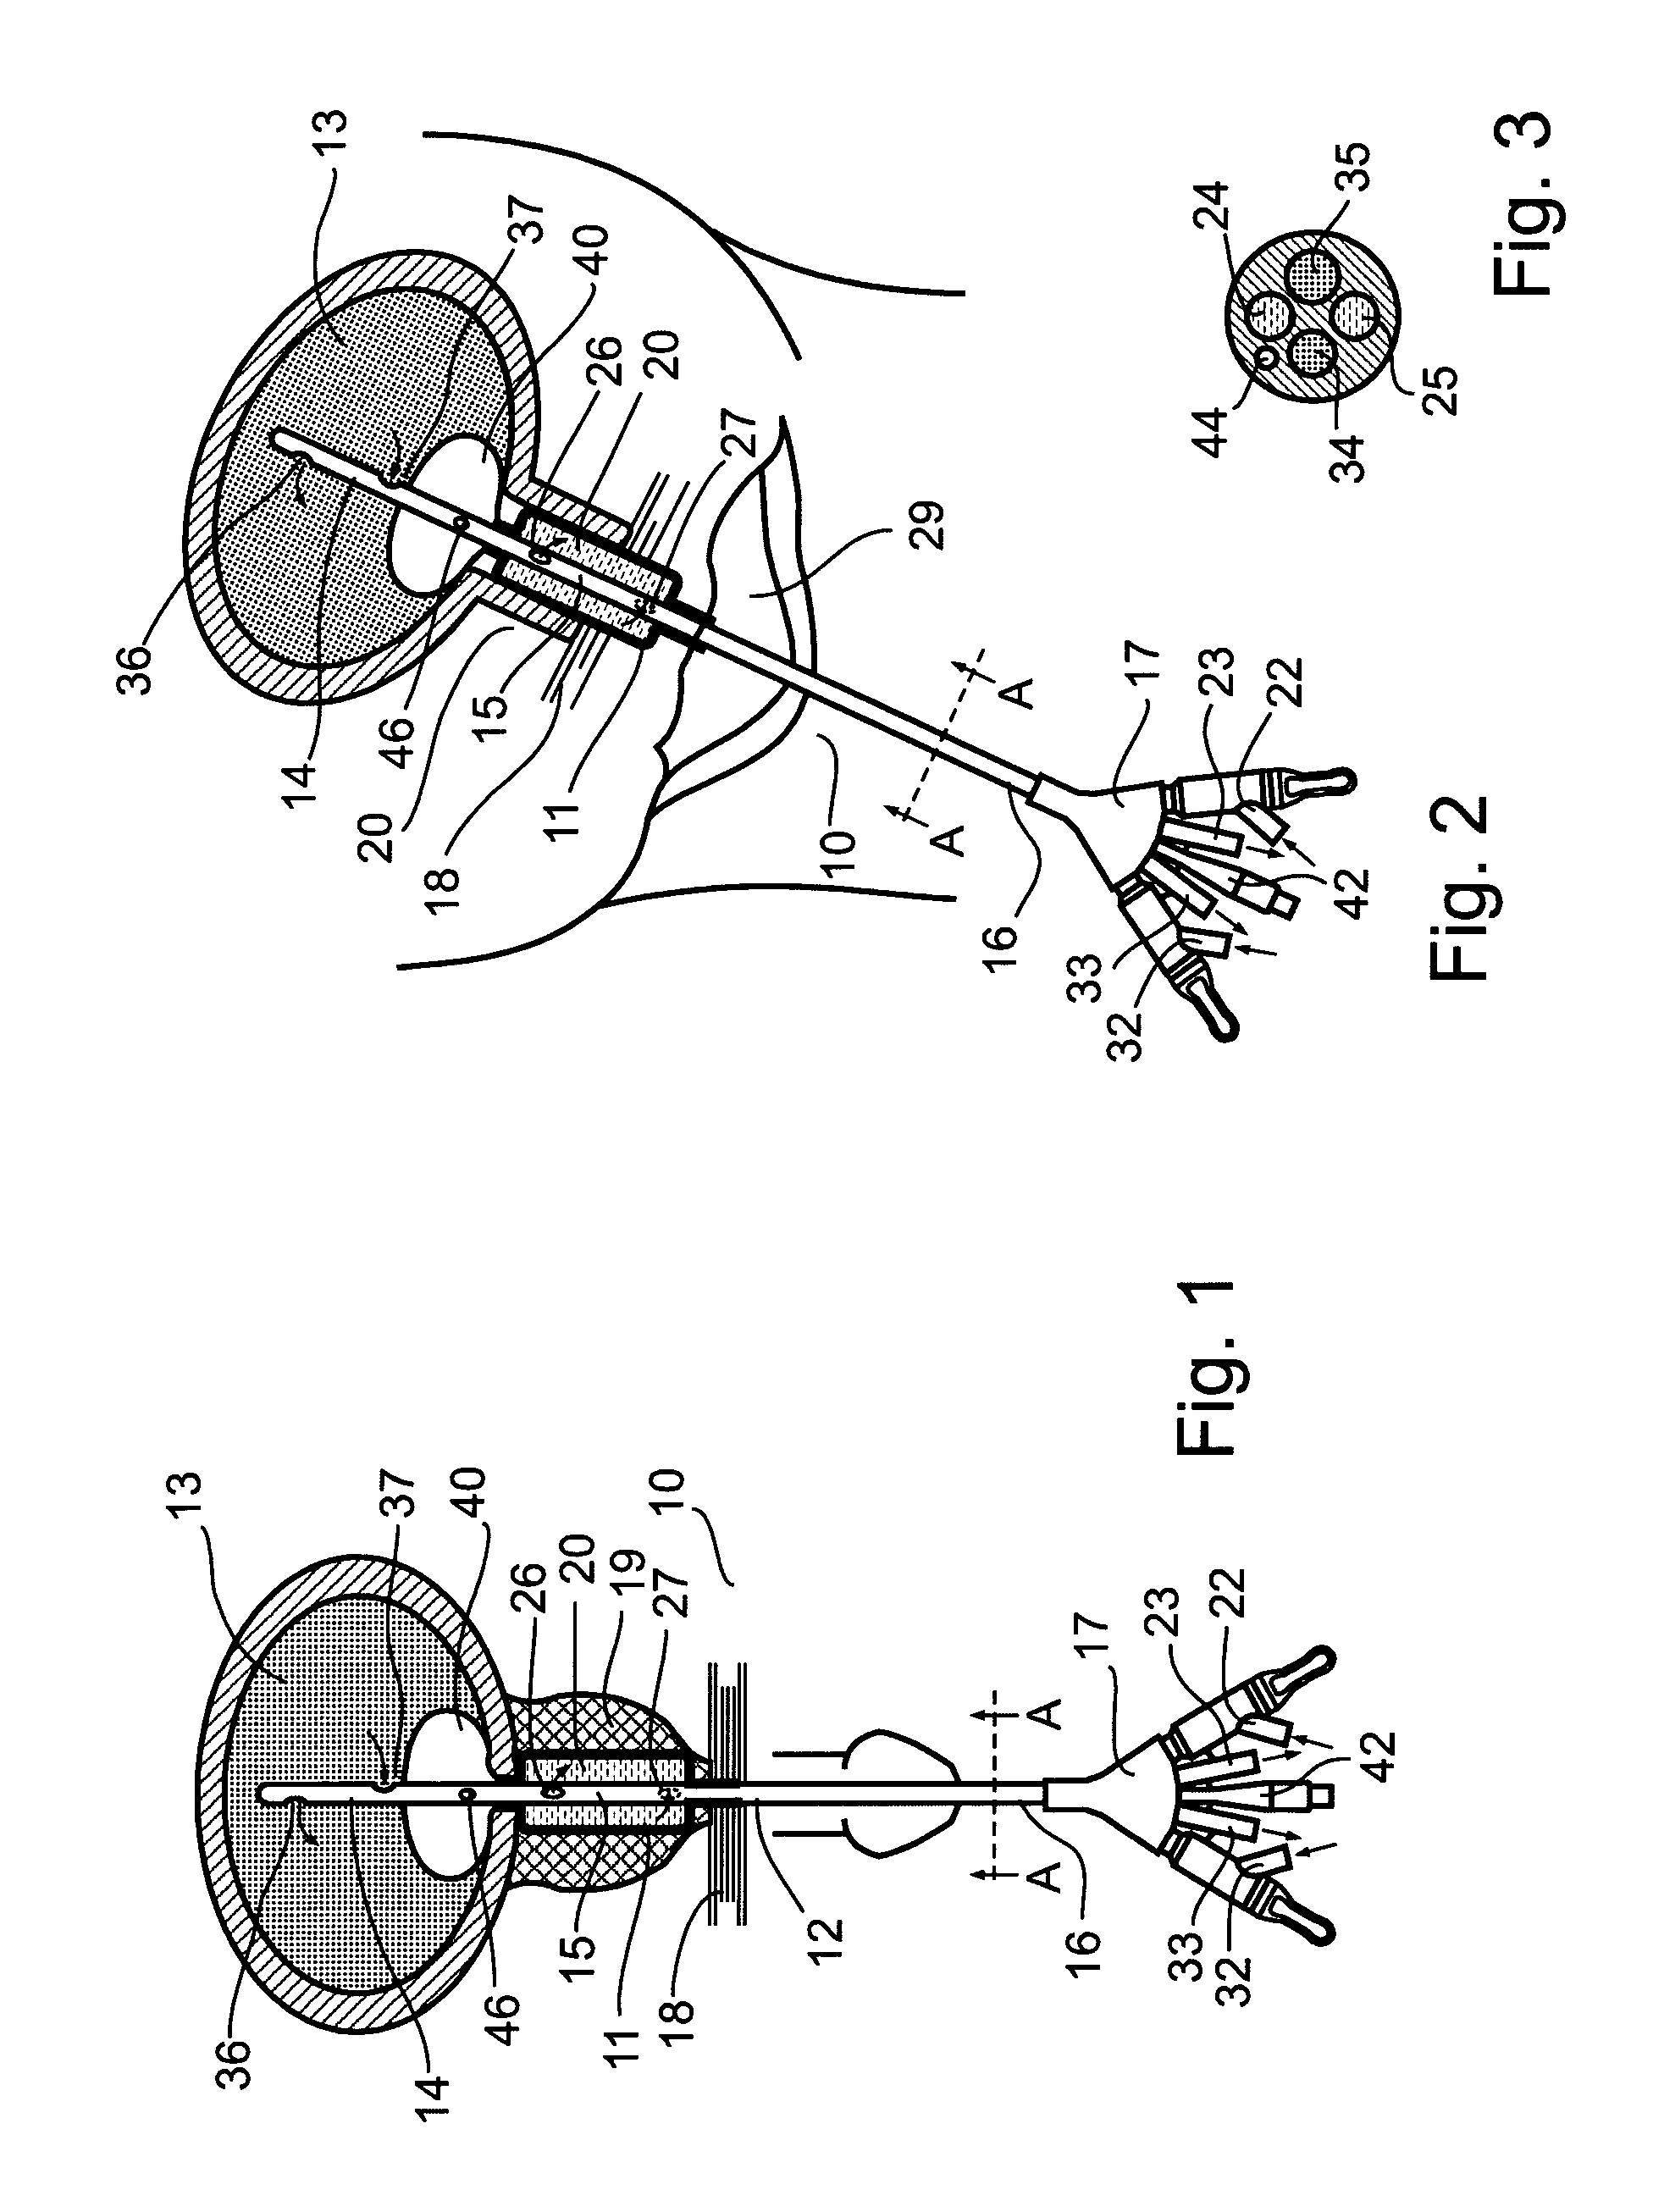 System and method for treating urinary tract disorders